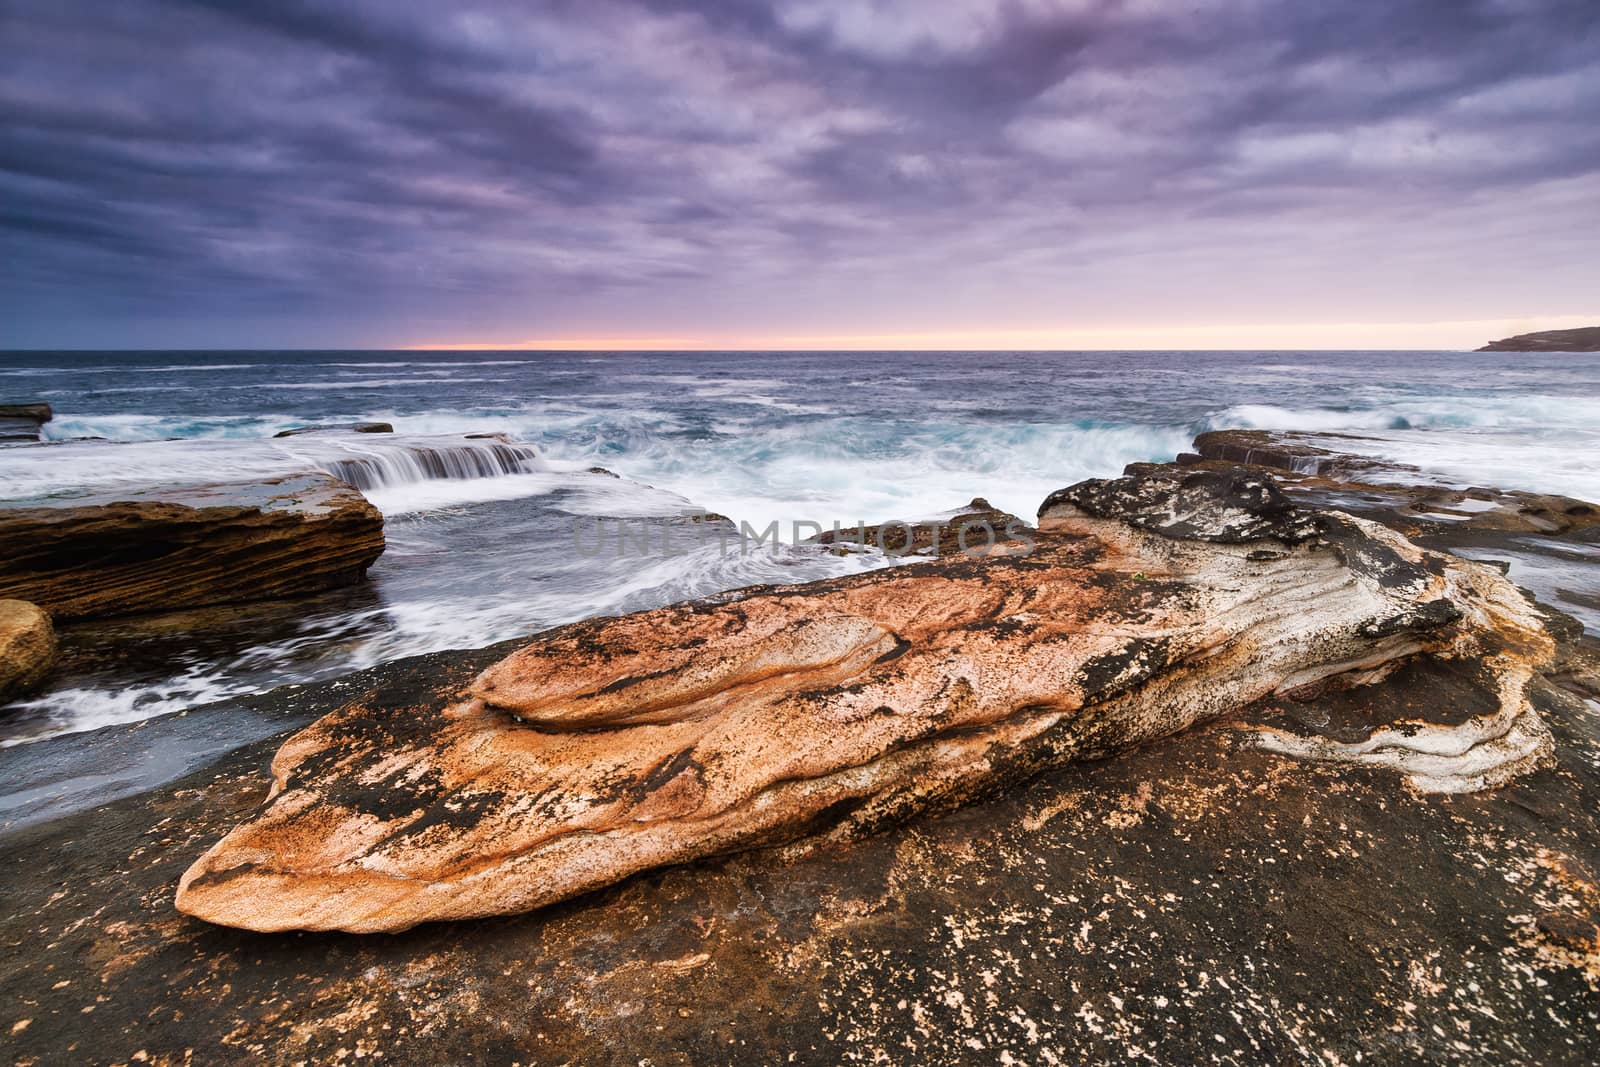 Sunrise seascape with orange rocks and ocean pools and sea shells with cloudy stormy sky and distant cliffs